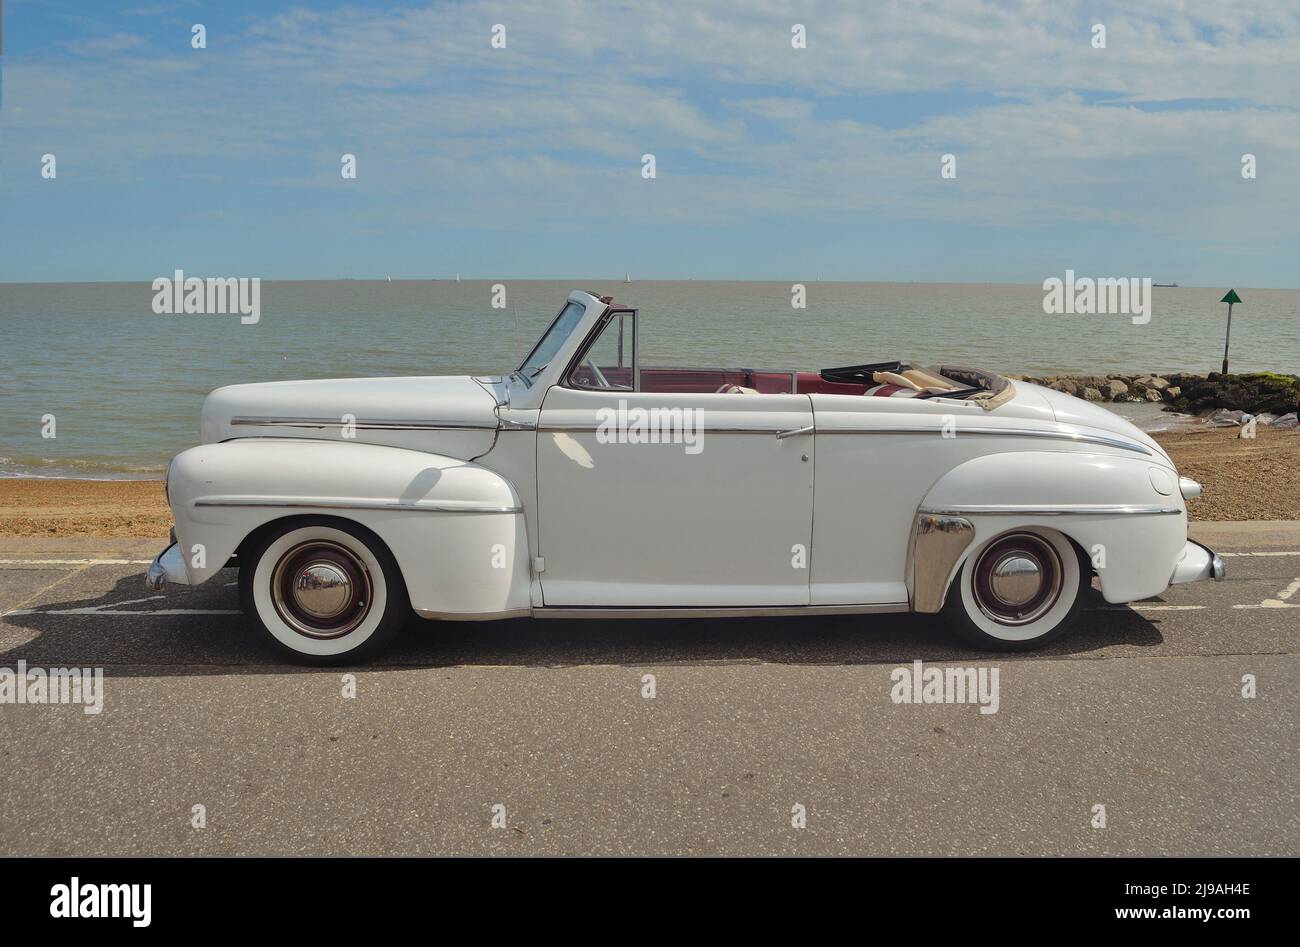 Classic White Ford Super Delux convertible  motorcar in show on seafront. Stock Photo